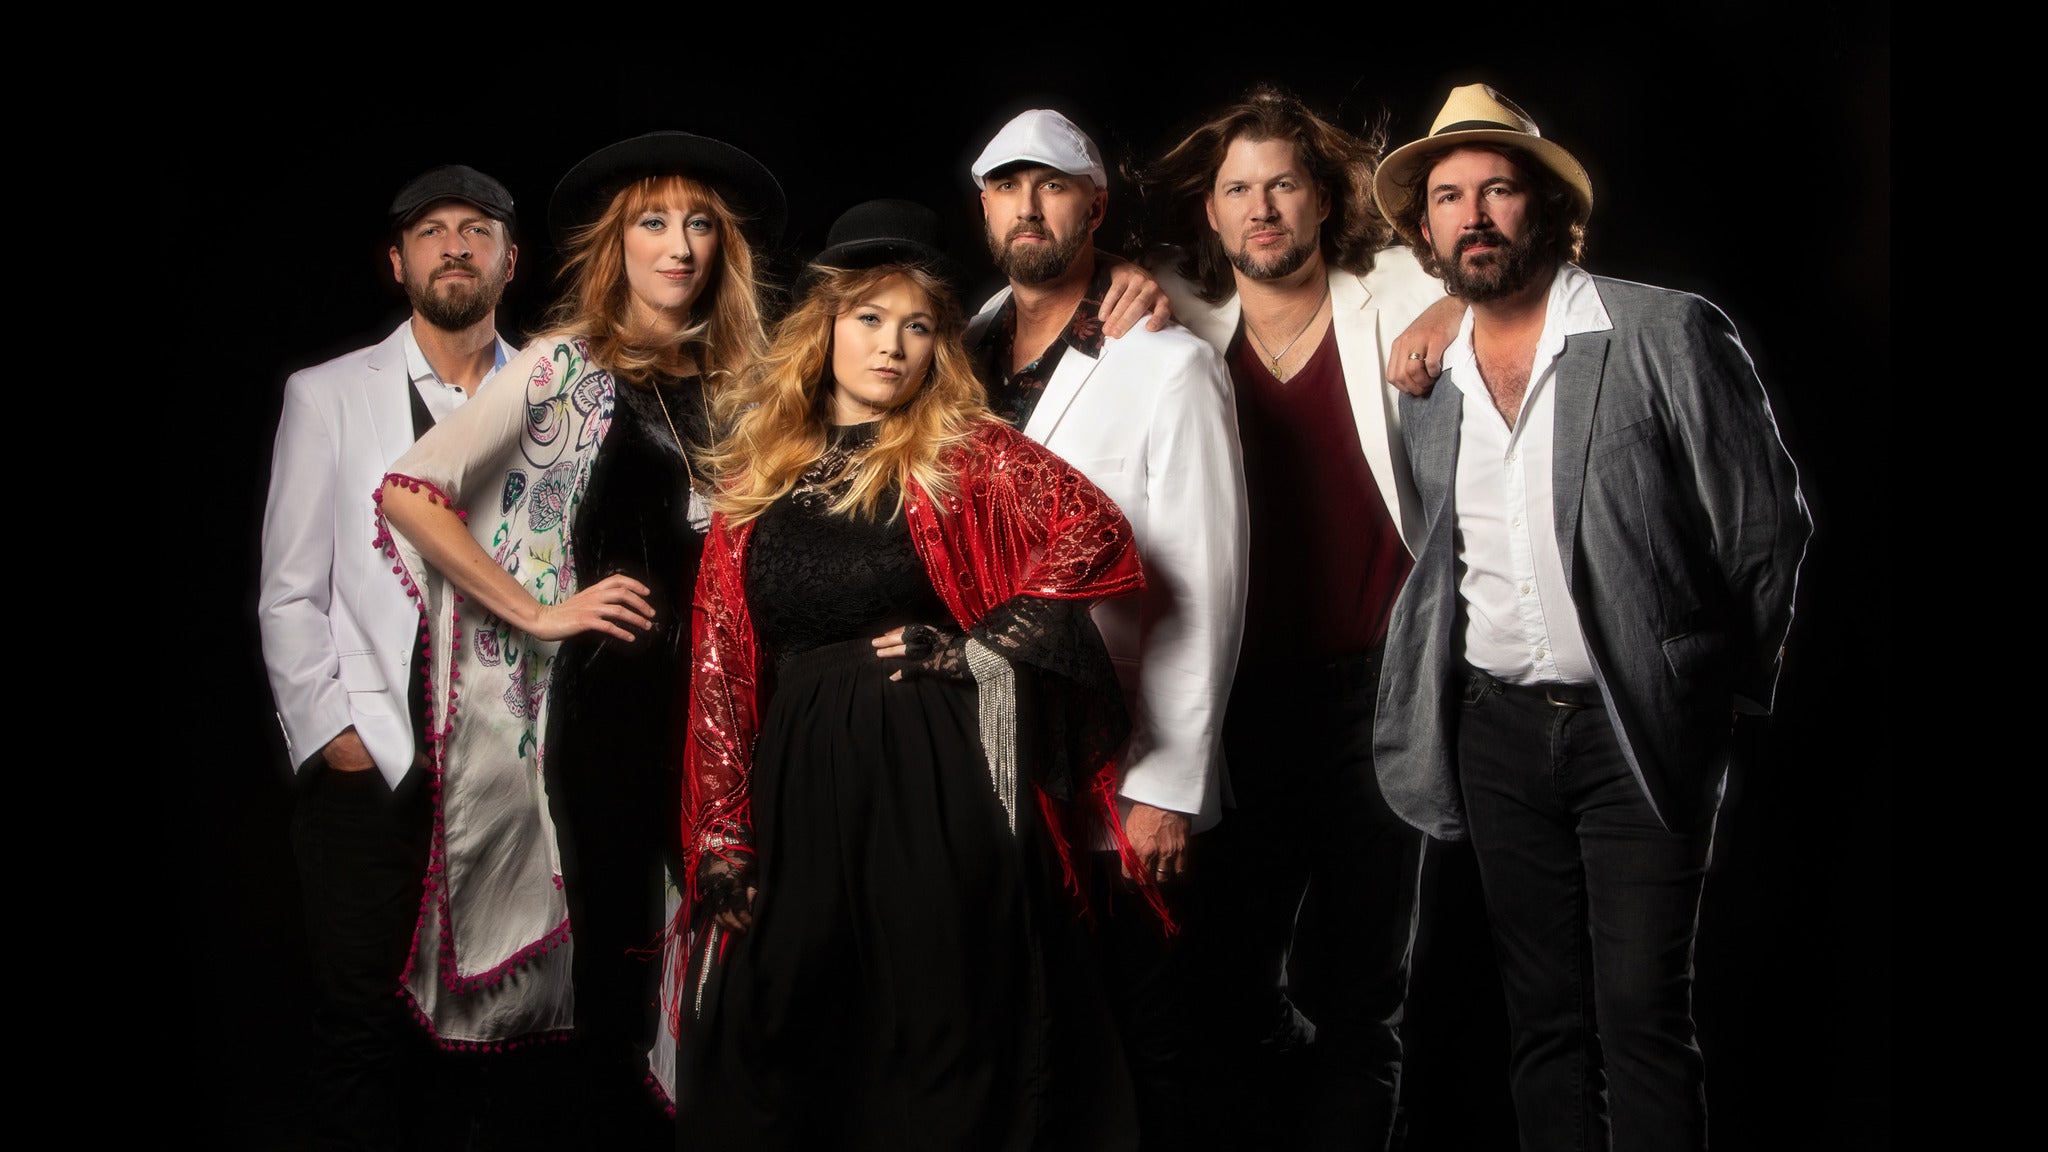 Rumours - A Tribute to Fleetwood Mac in North Myrtle Beach promo photo for Citi® Cardmember Preferred presale offer code